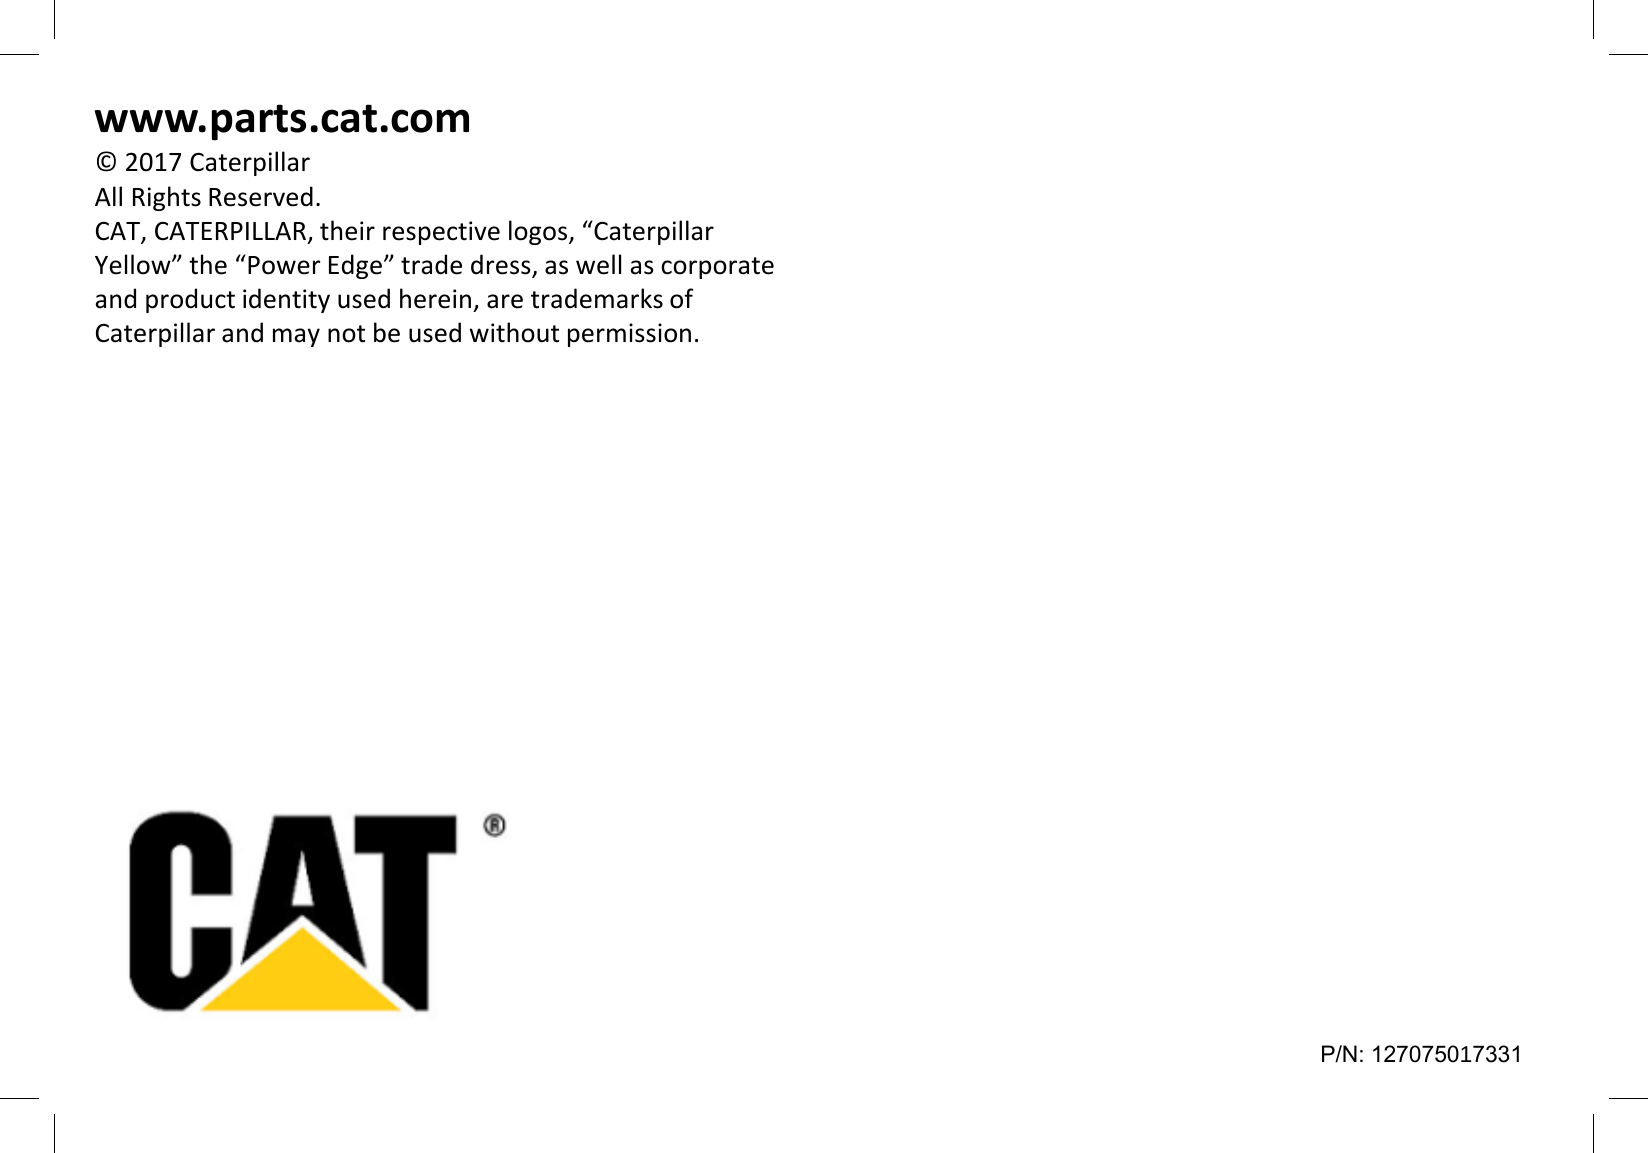 www.parts.cat.com© 2017 CaterpillarAll Rights Reserved.CAT, CATERPILLAR, their respective logos, “Caterpillar Yellow” the “Power Edge” trade dress, as well as corporate and product identity used herein, are trademarks of Caterpillar and may not be used without permission.P/N: 127075017331